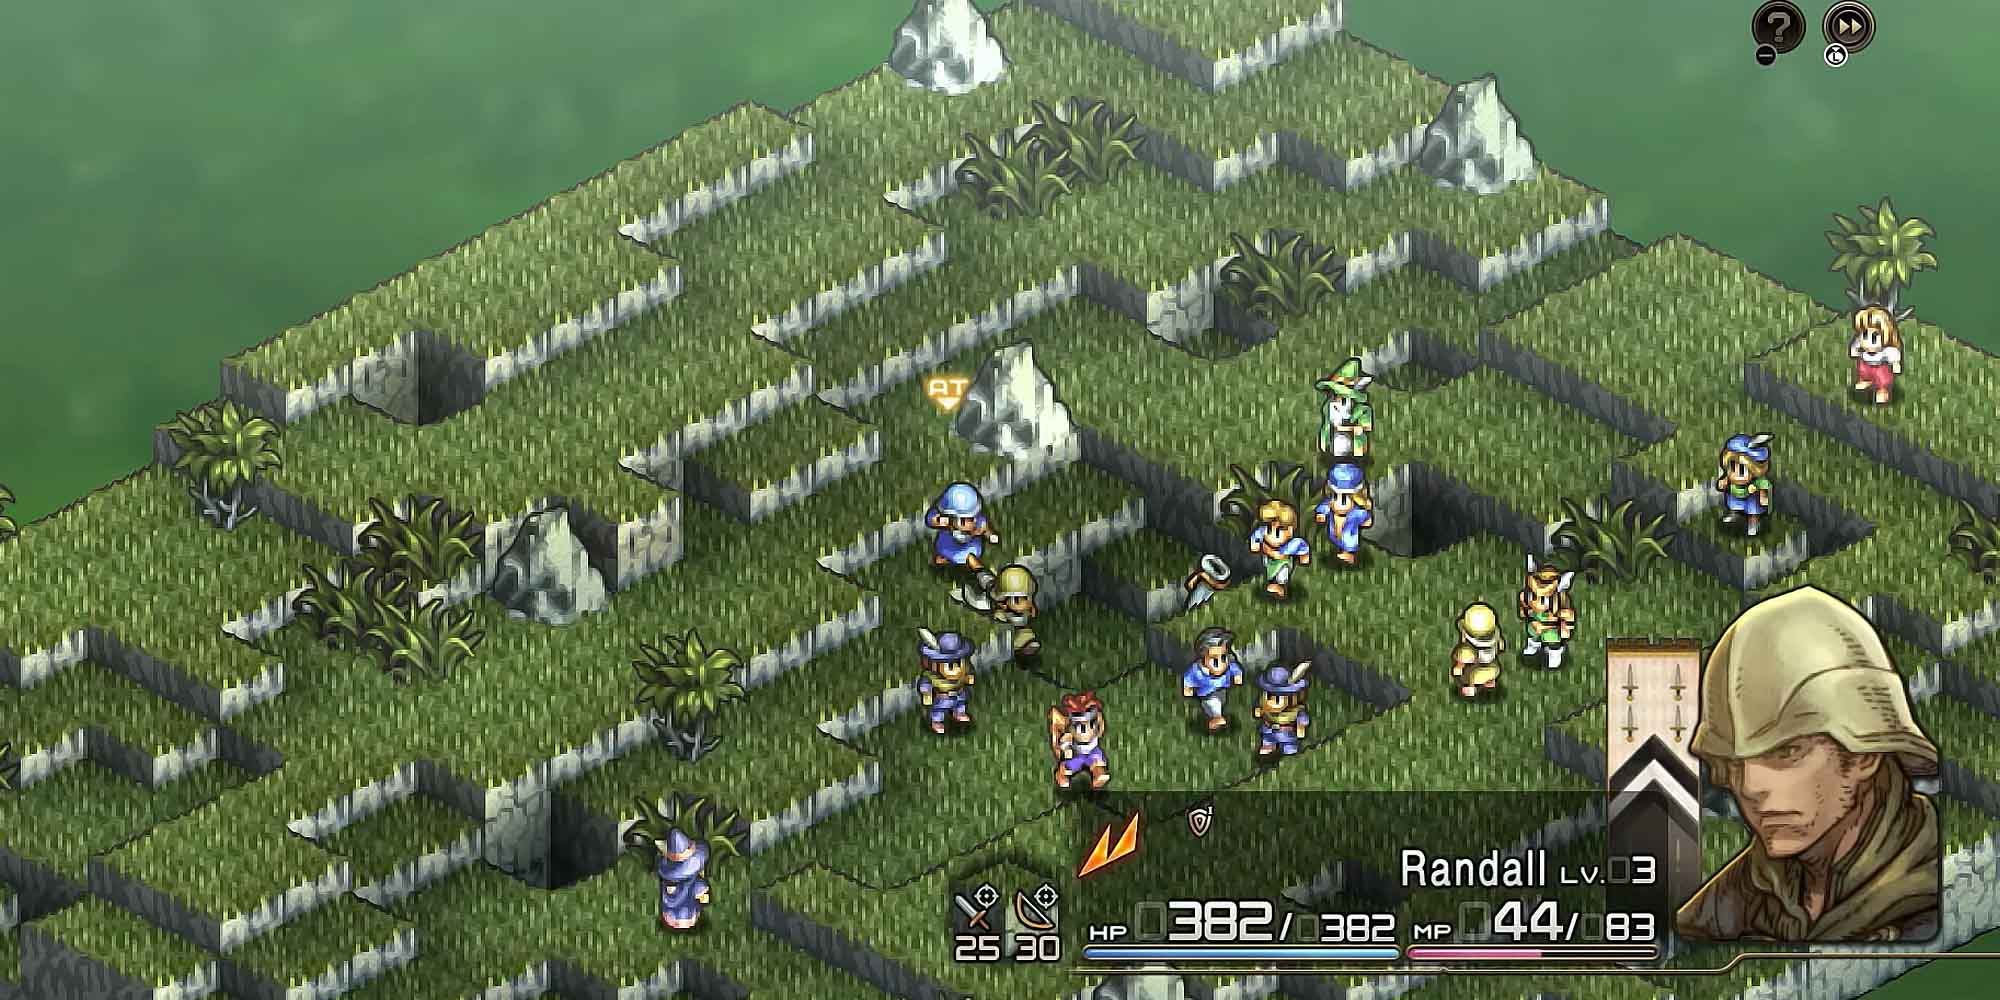 An example of the terrain conditions the player can encounter in Tactics Ogre Reborn